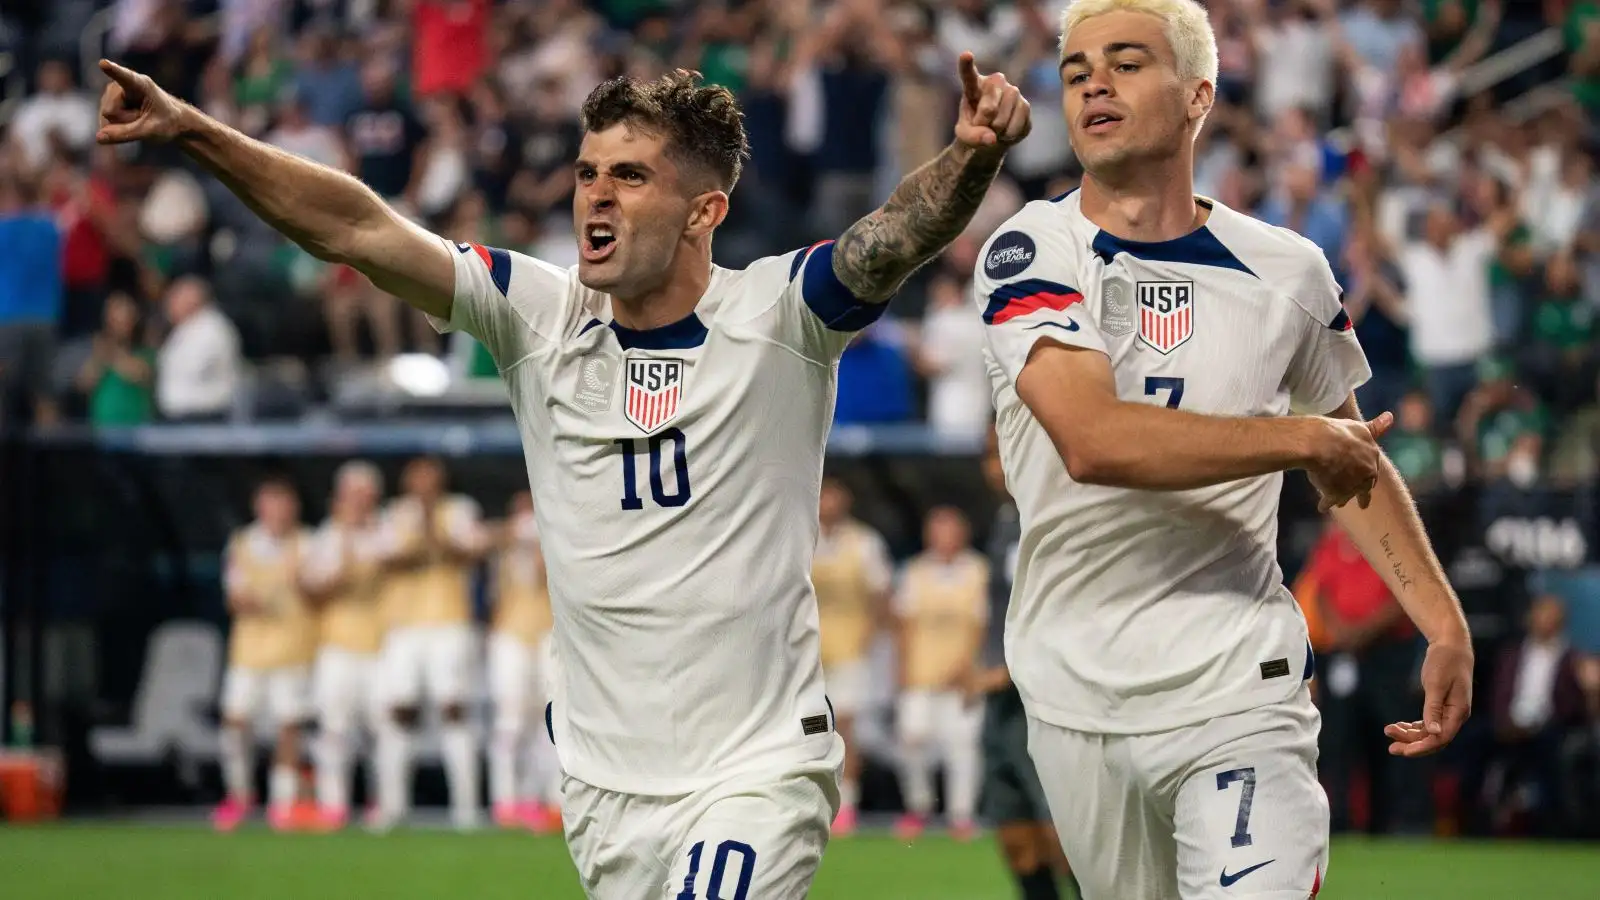 Chelsea winger Christian Pulisic celebrates a goal for the United States.